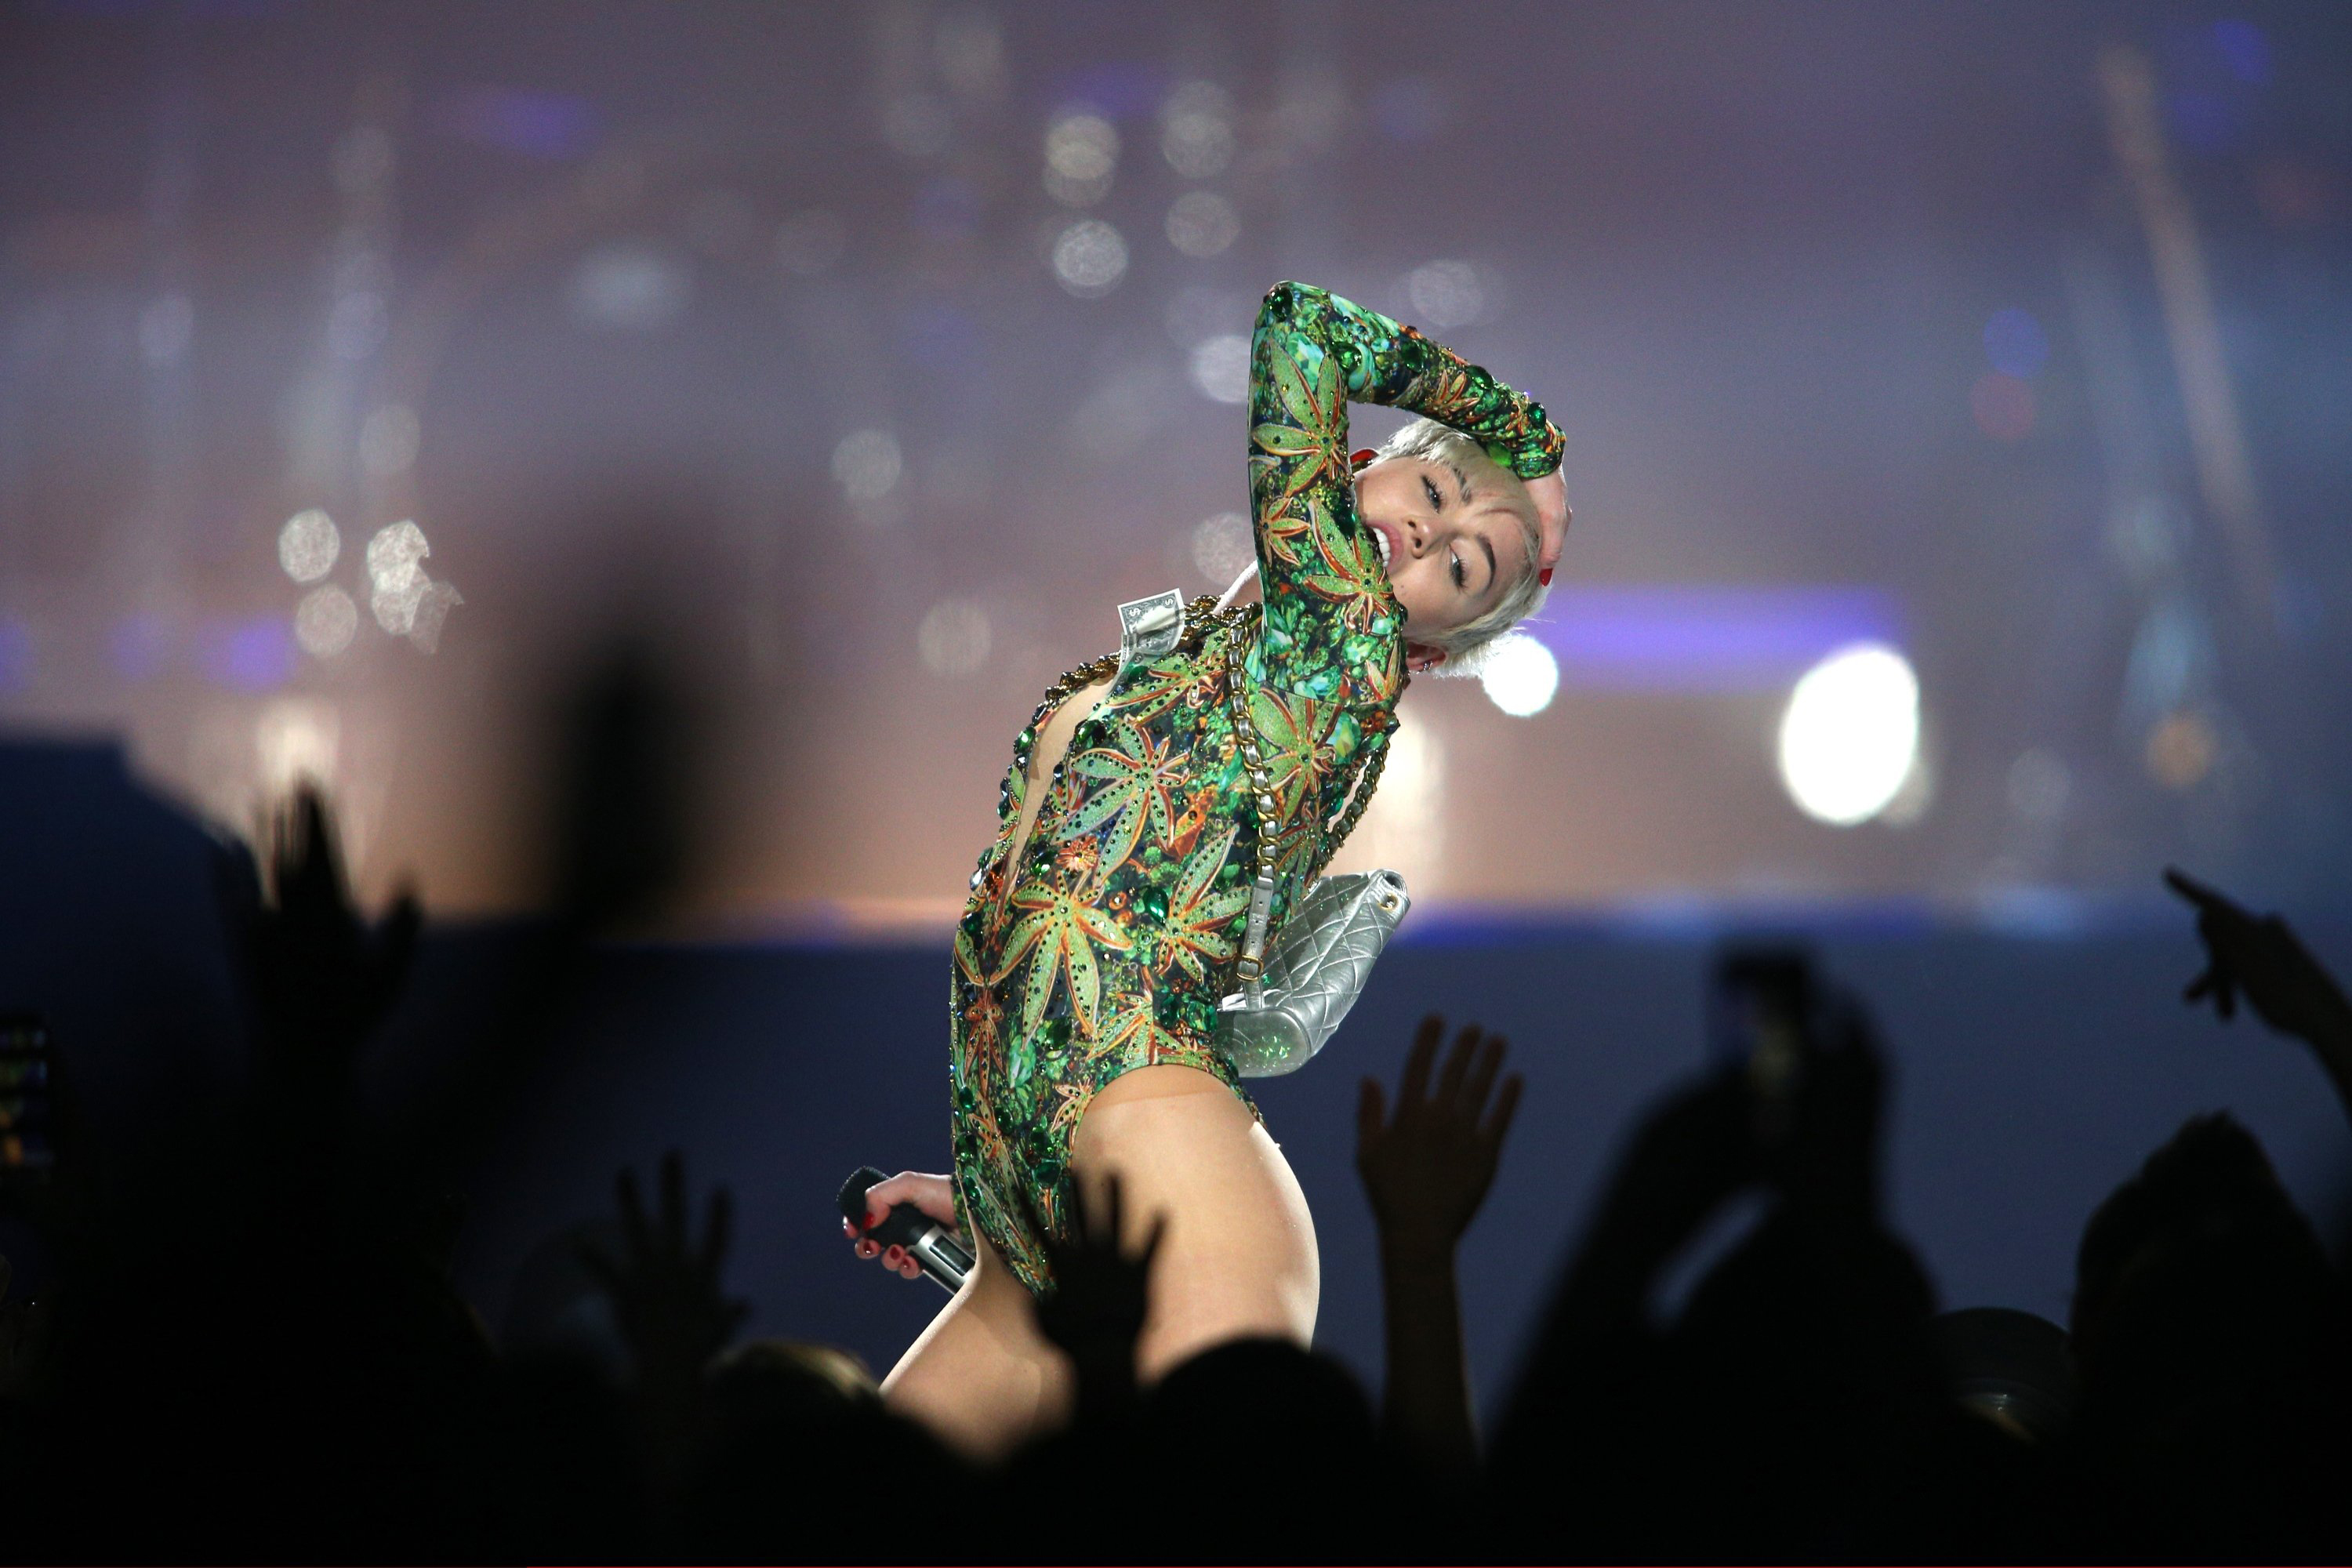 Miley Cyrus performs at the Xcel Energy Center on March 10, 2014 in St. Paul, Minn.